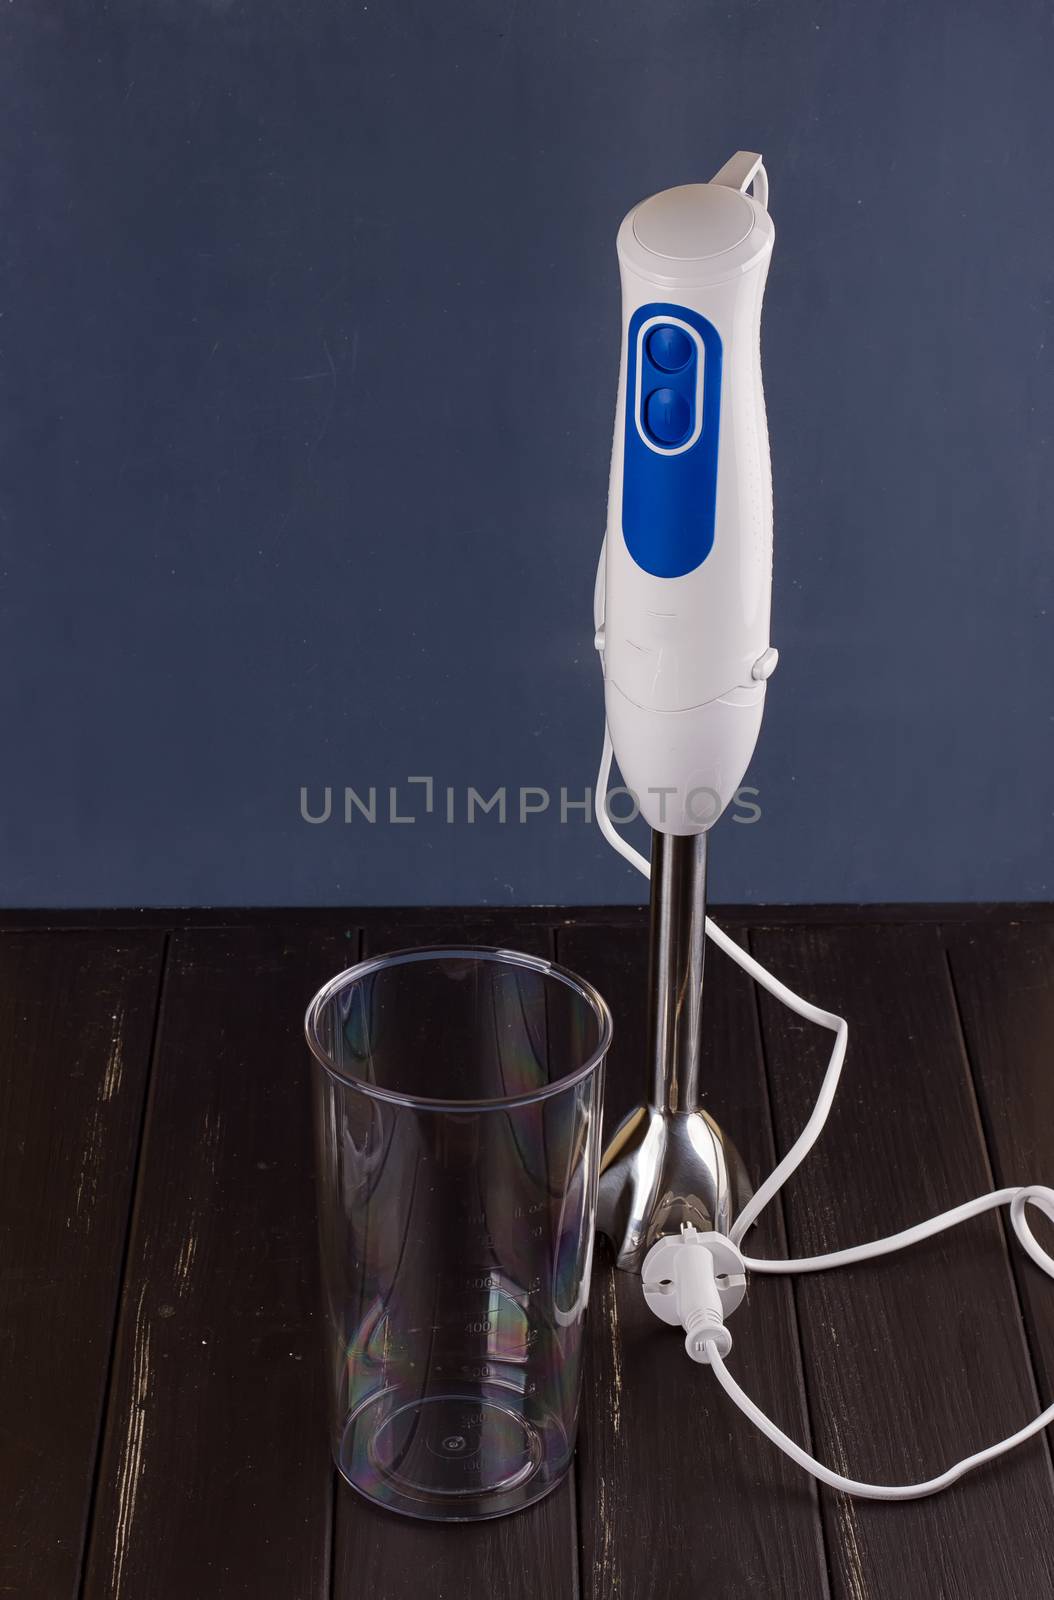 hand blender electric mixer on the black background